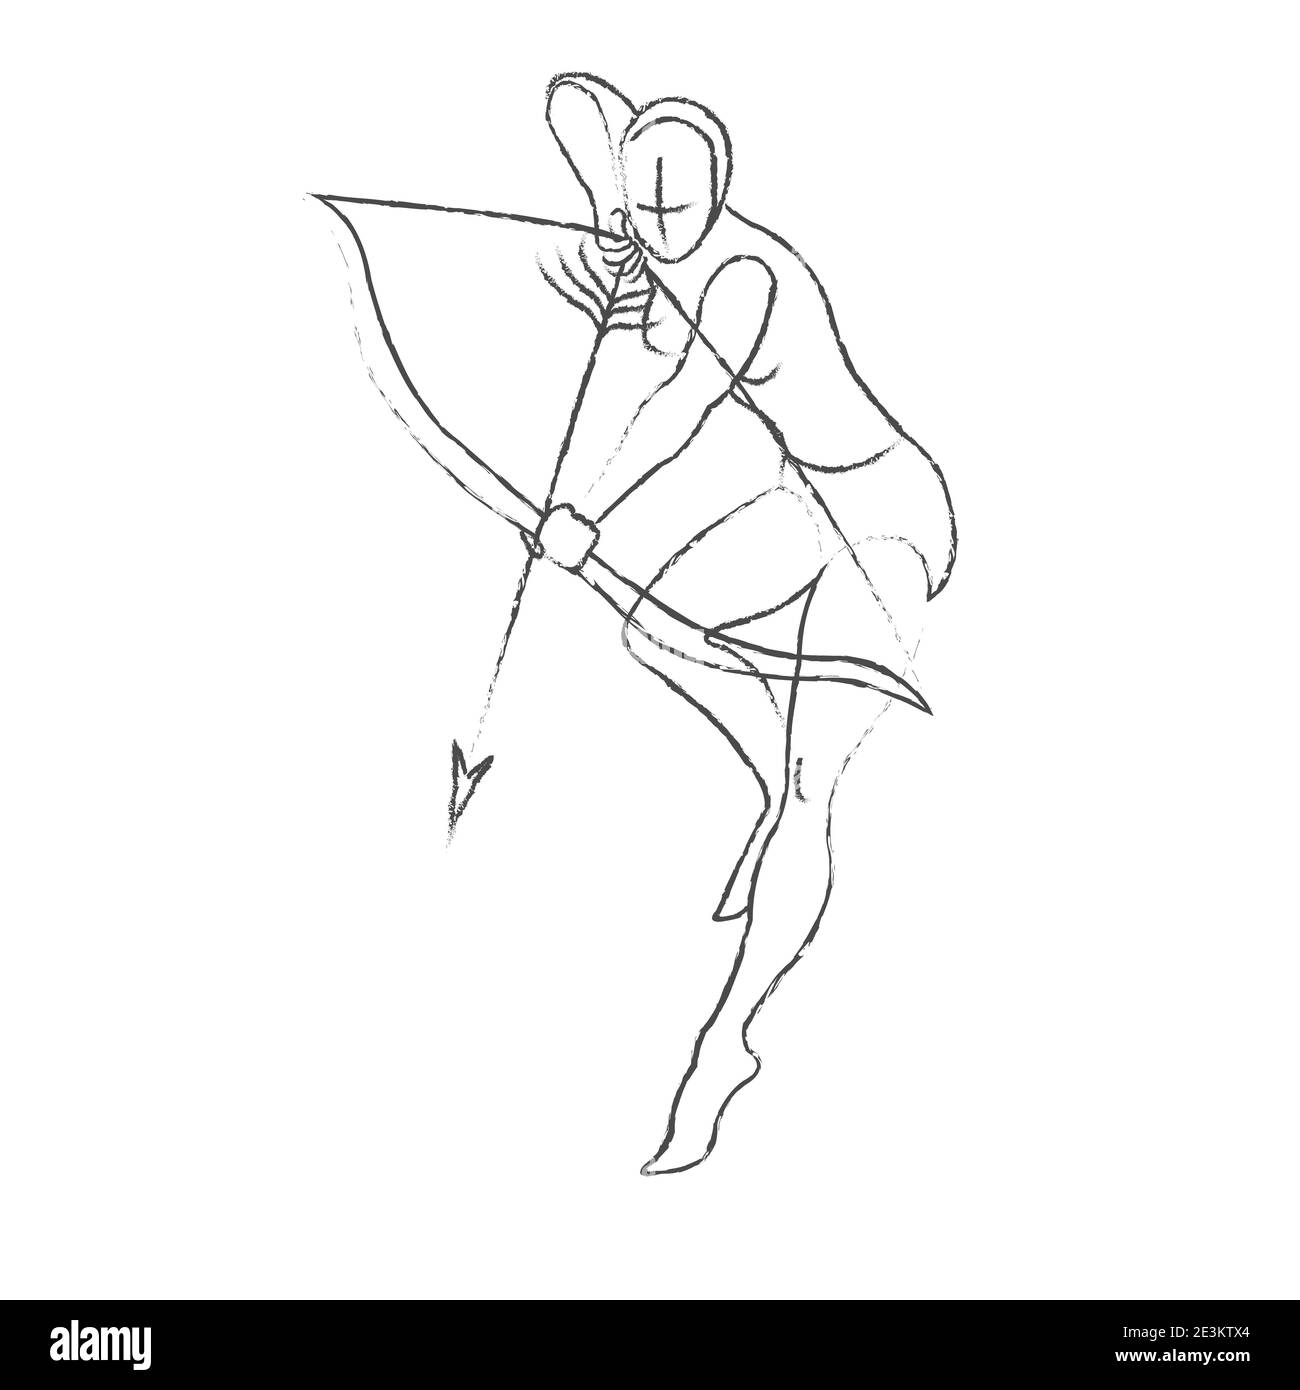 Pin by Wade Ryer on Centaur | Archery poses, Body reference drawing, Drawing  reference poses